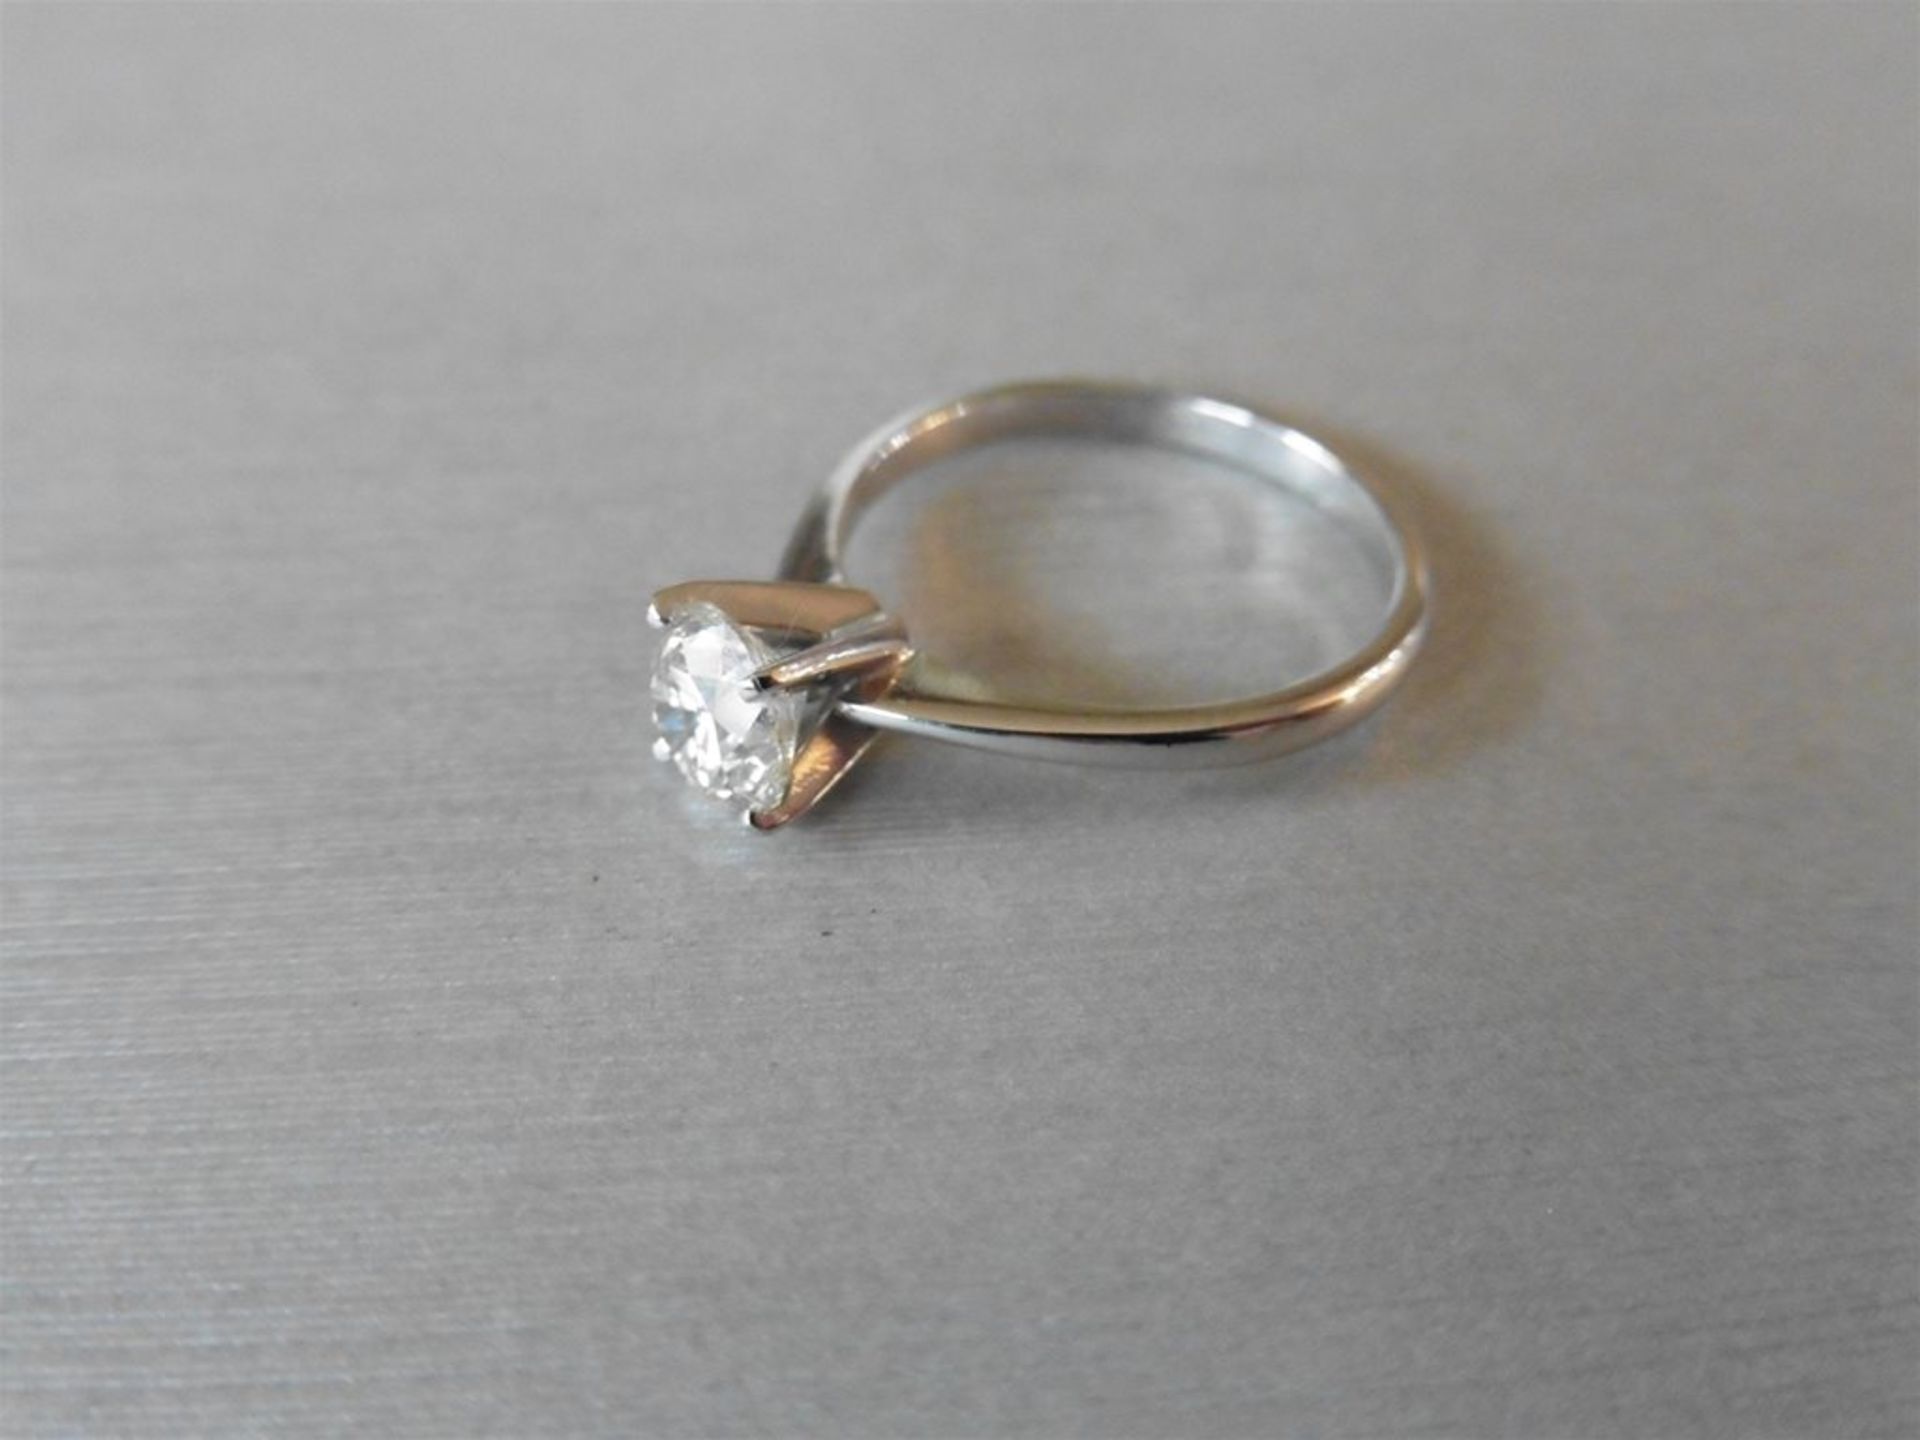 1.02ct diamond solitaire ring with a brilliant cut diamond. I colour and I1 clarity. - Image 4 of 4